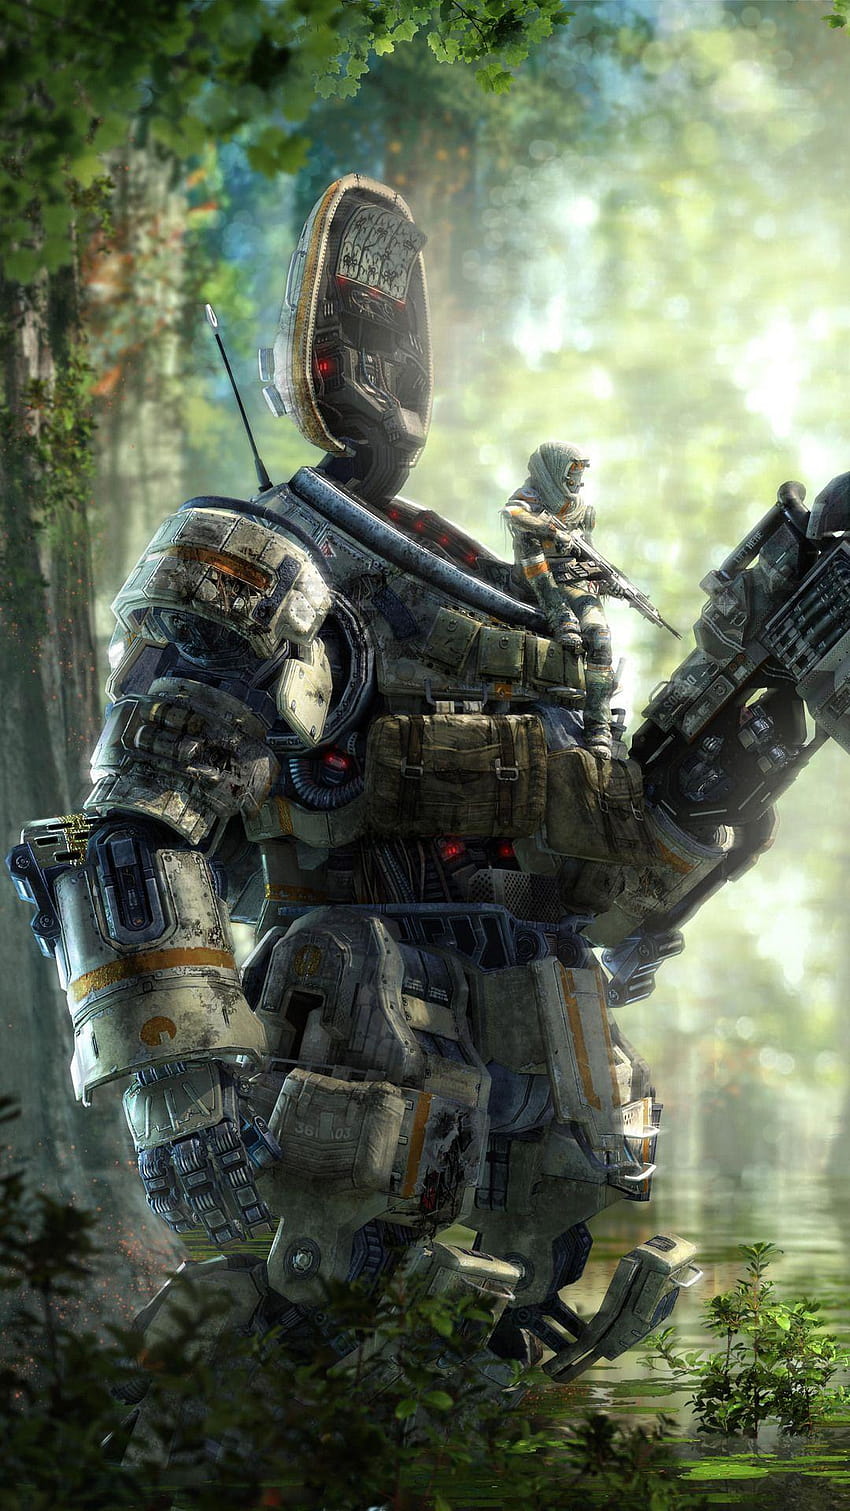 Titanfall Wallpapers for Iphone 7 Iphone 7 plus Iphone 6 plus  Titanfall  Free hd wallpapers Wallpaper